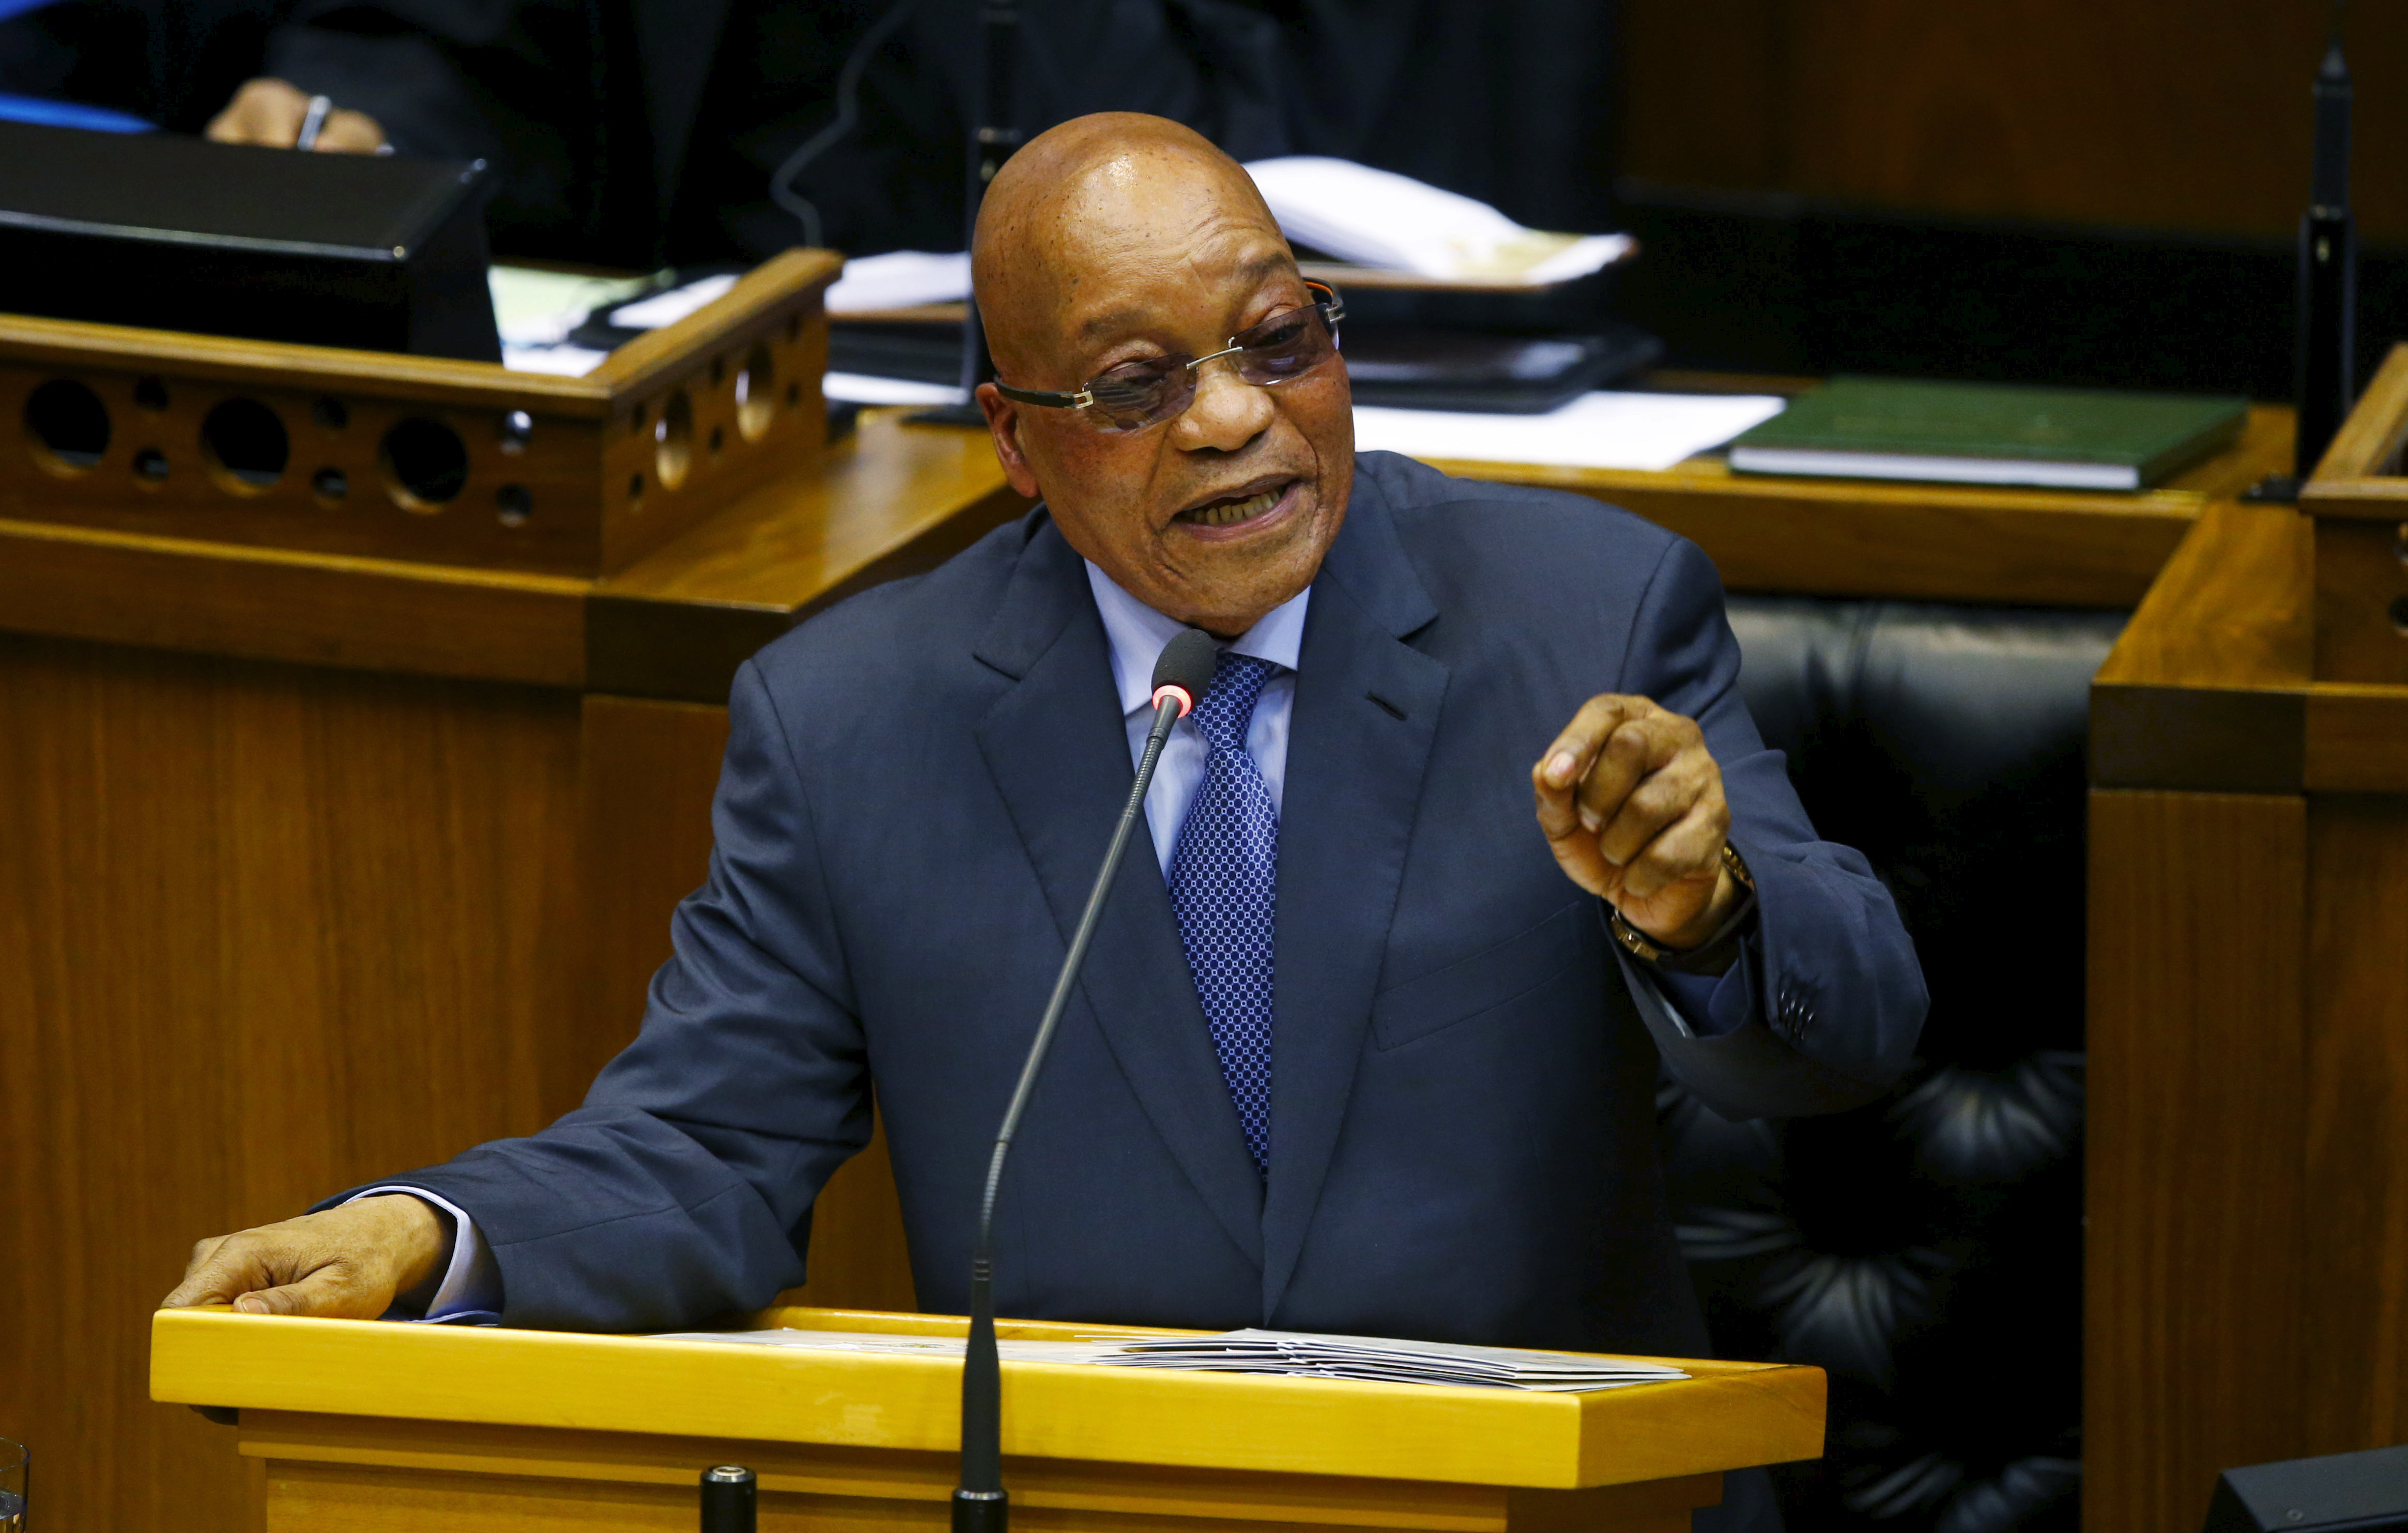 President Jacob Zuma answers questions at Parliament in Cape Town, South Africa, March 17, 2016. A nephew of Zuma's was mentioned in the Panama Papers. (Mike Hutchings—Reuters)